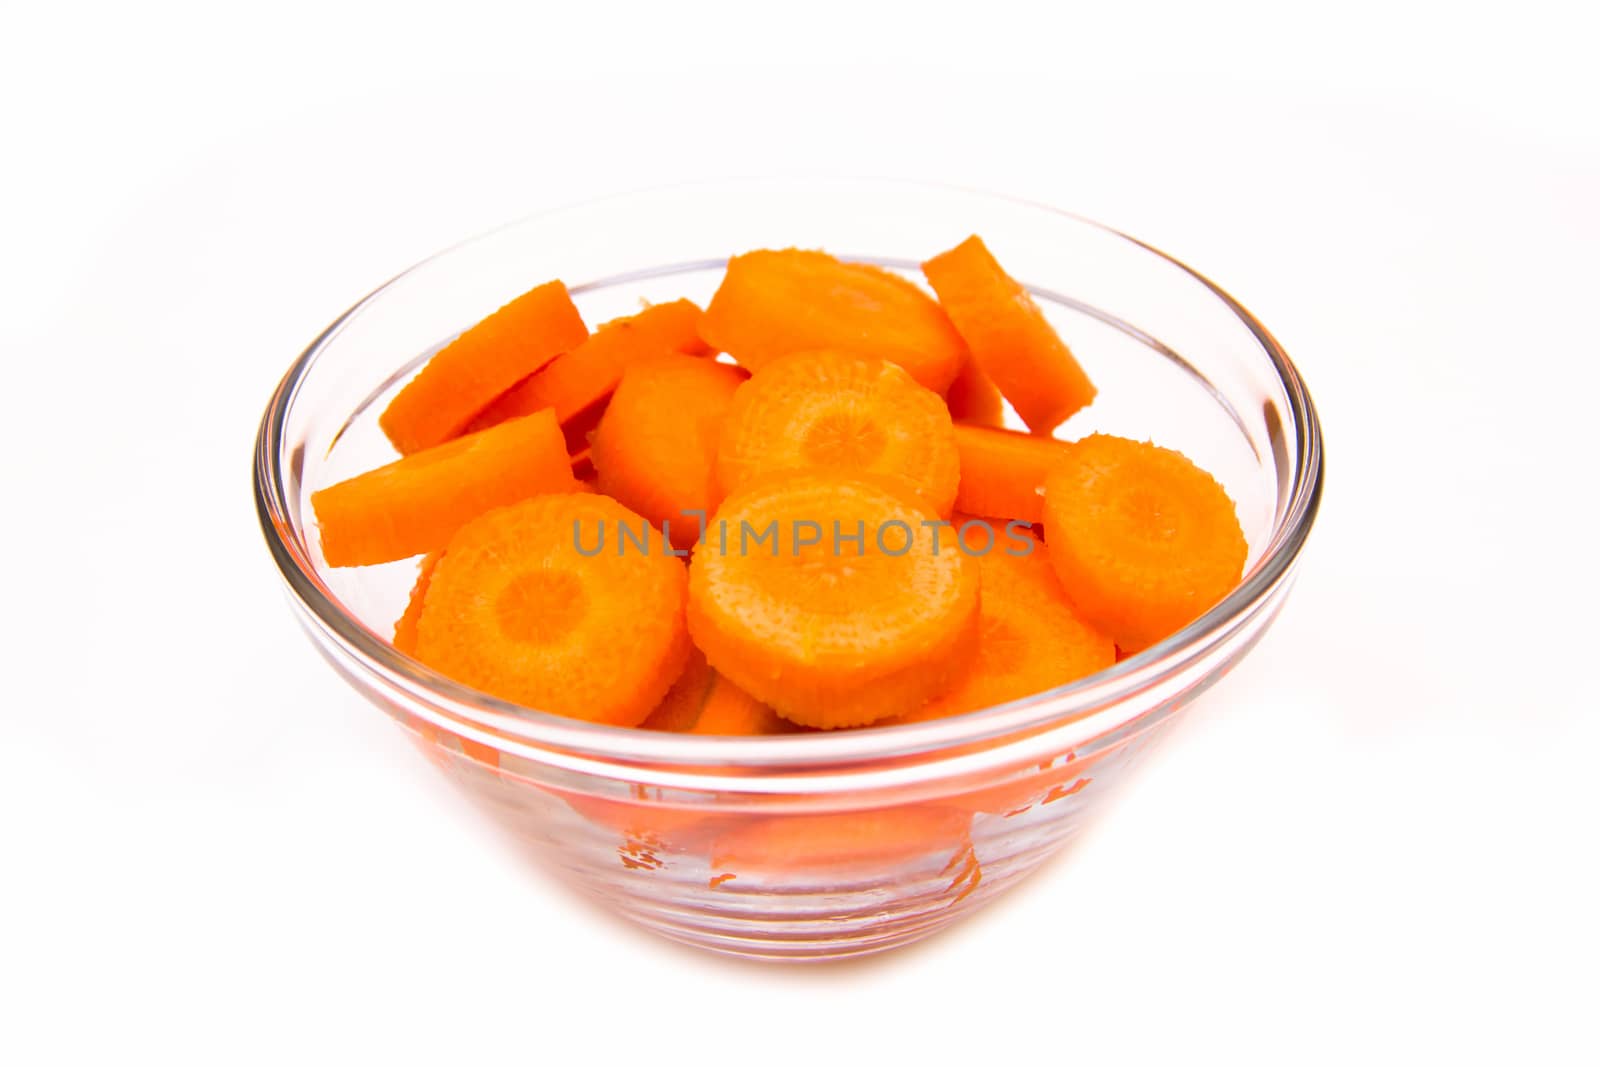 Carrot slices on bowl by spafra